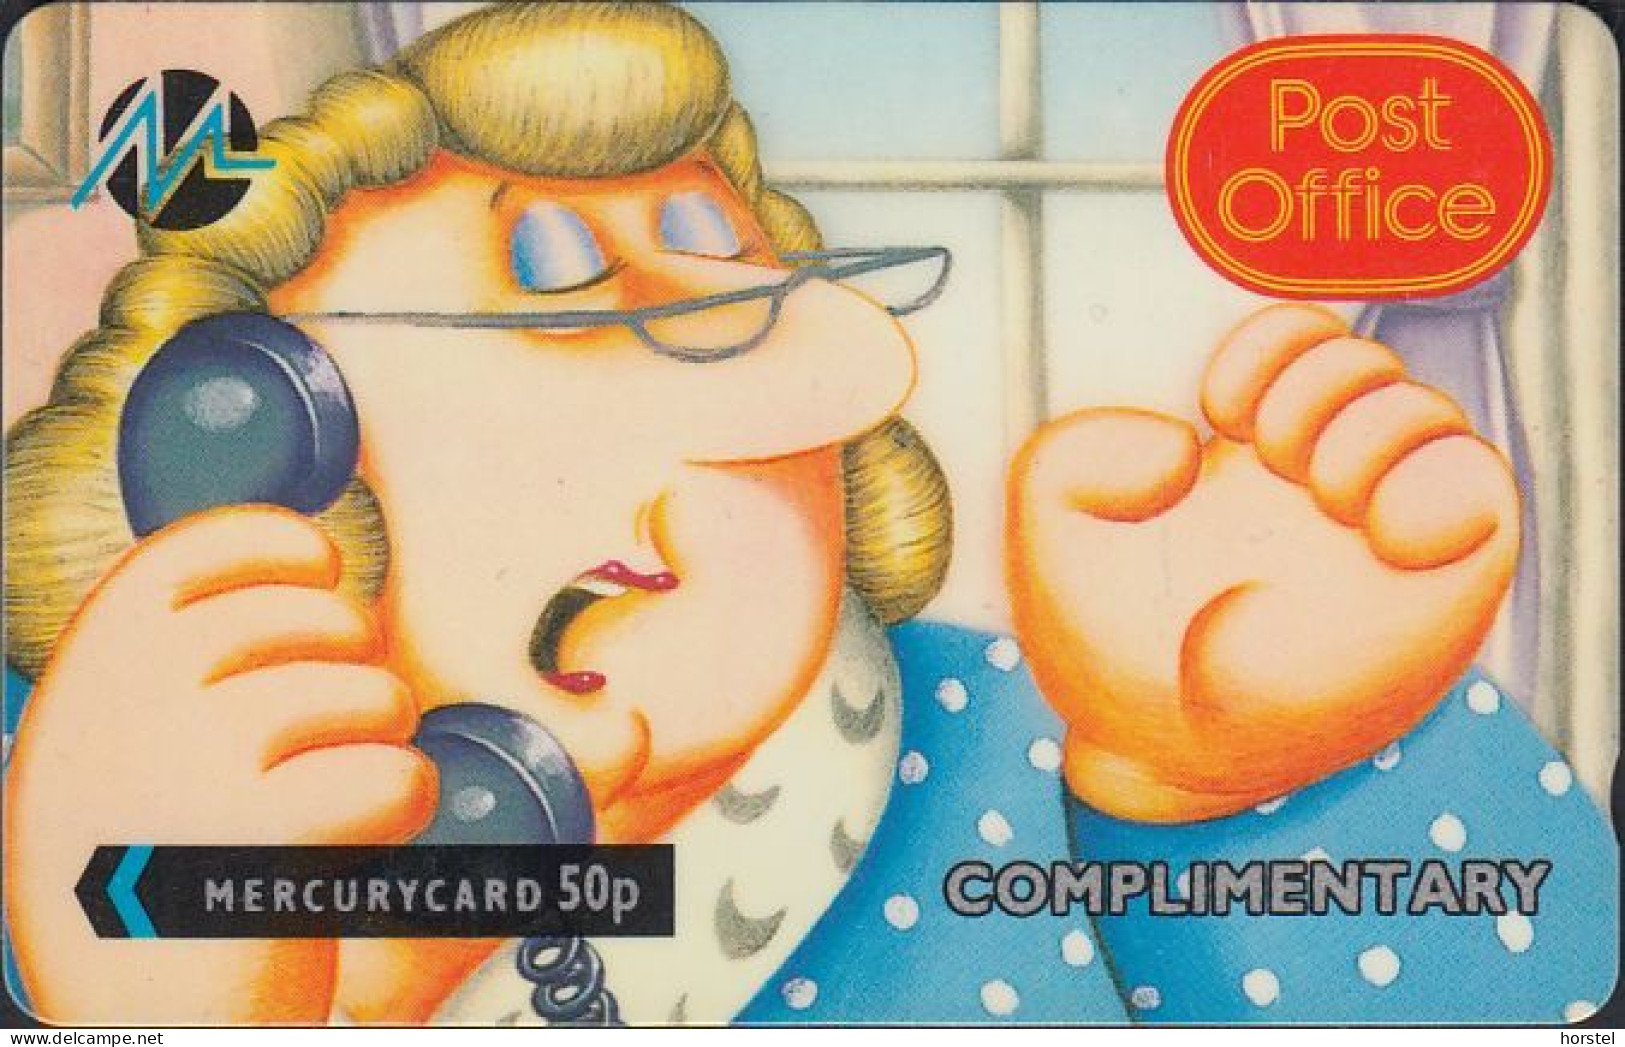 Paytelco Cards - PYPO004 - Post Office Ada - Comic - 50p - Complimentary - 5PPOA - Mercury Communications & Paytelco